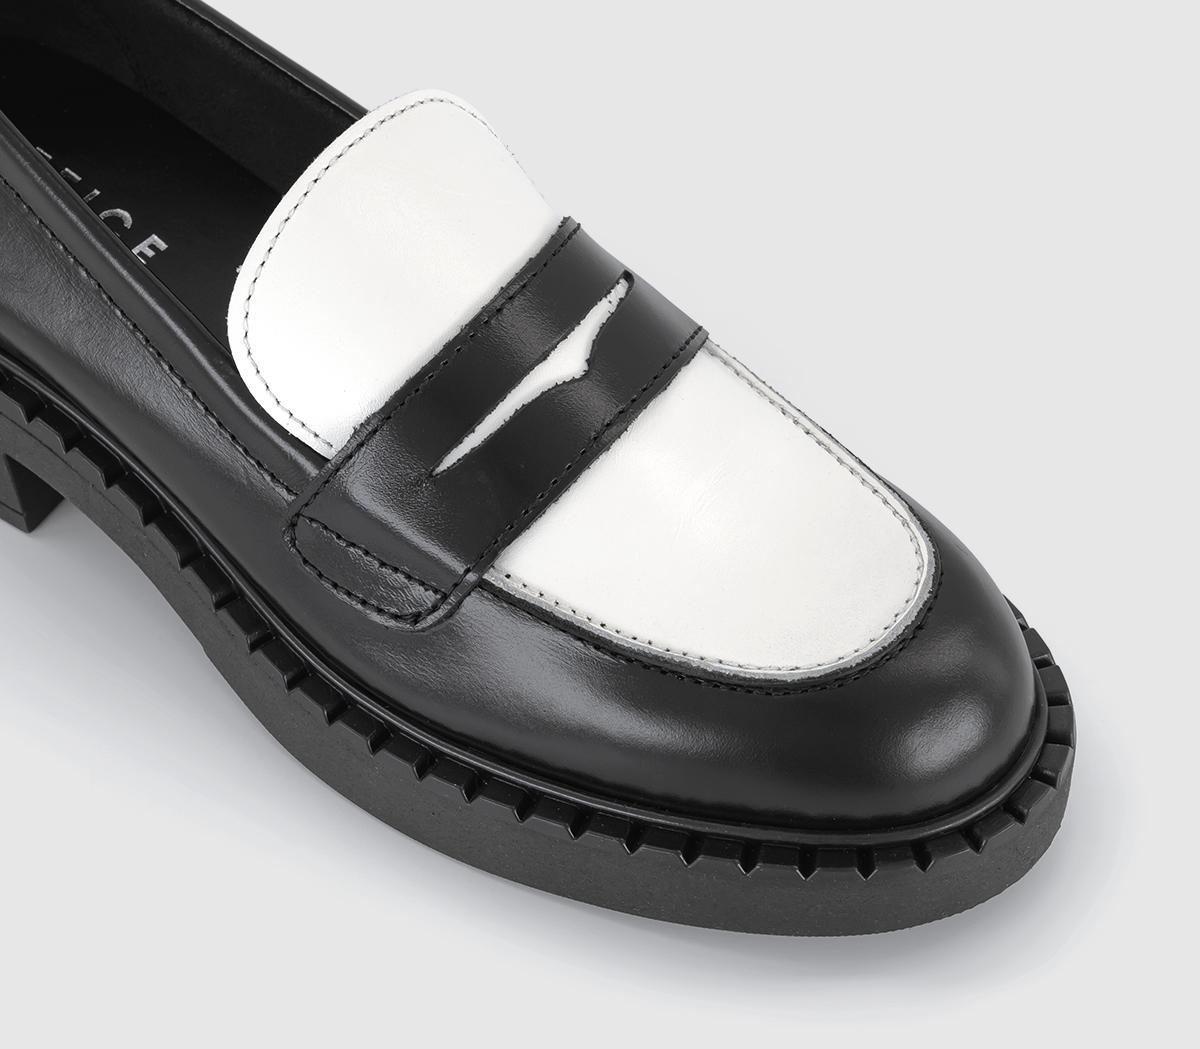 OFFICE Favour Chunky Sole Loafers Blackwhite Leather Mix - Flat Shoes ...